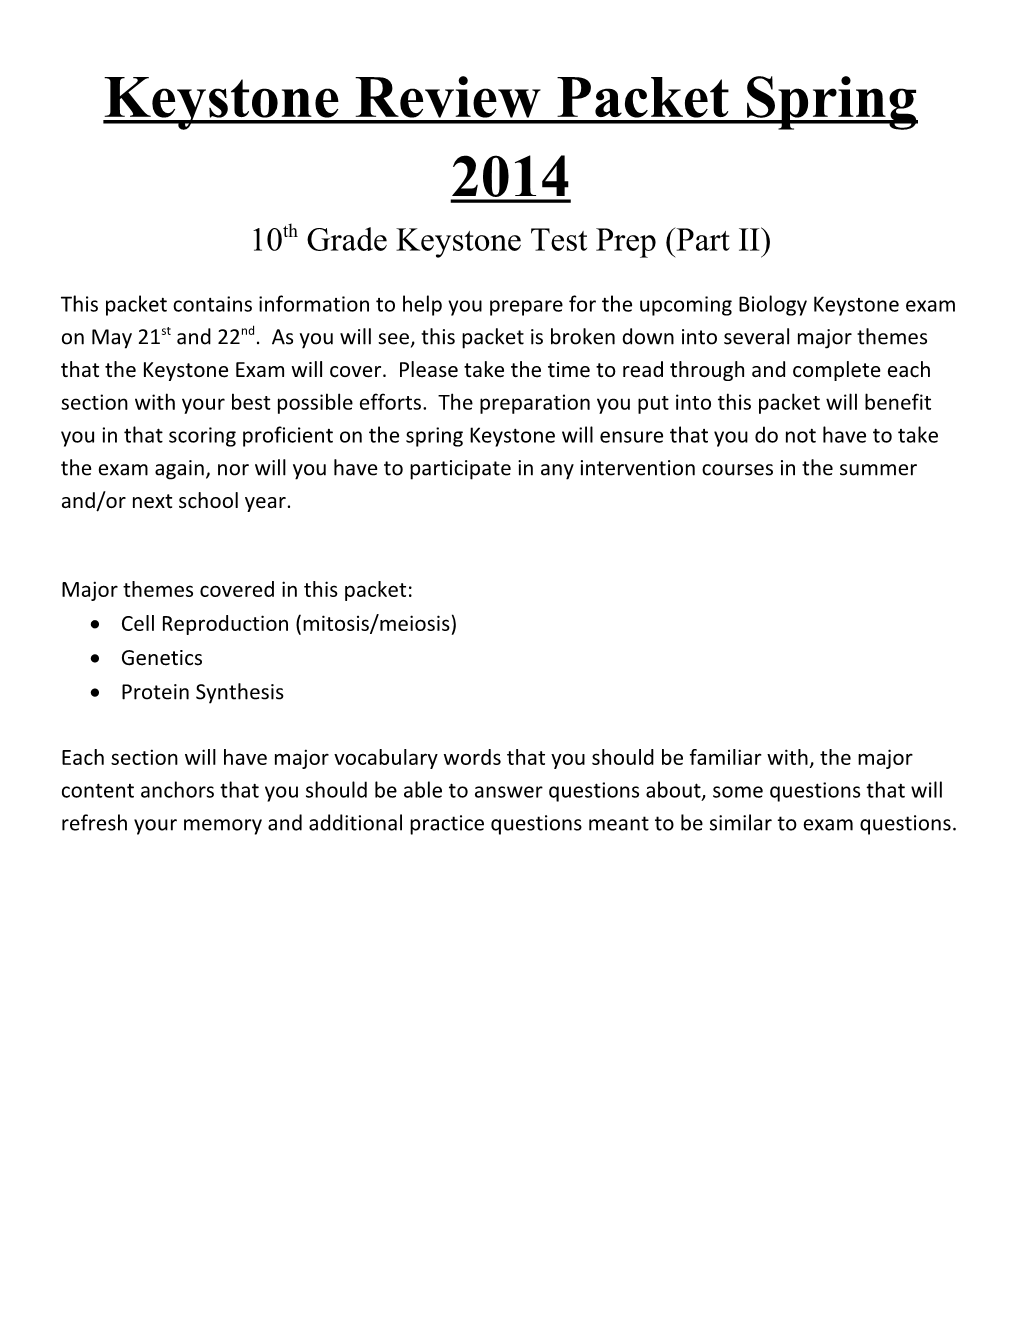 Keystone Review Packet Spring 2014